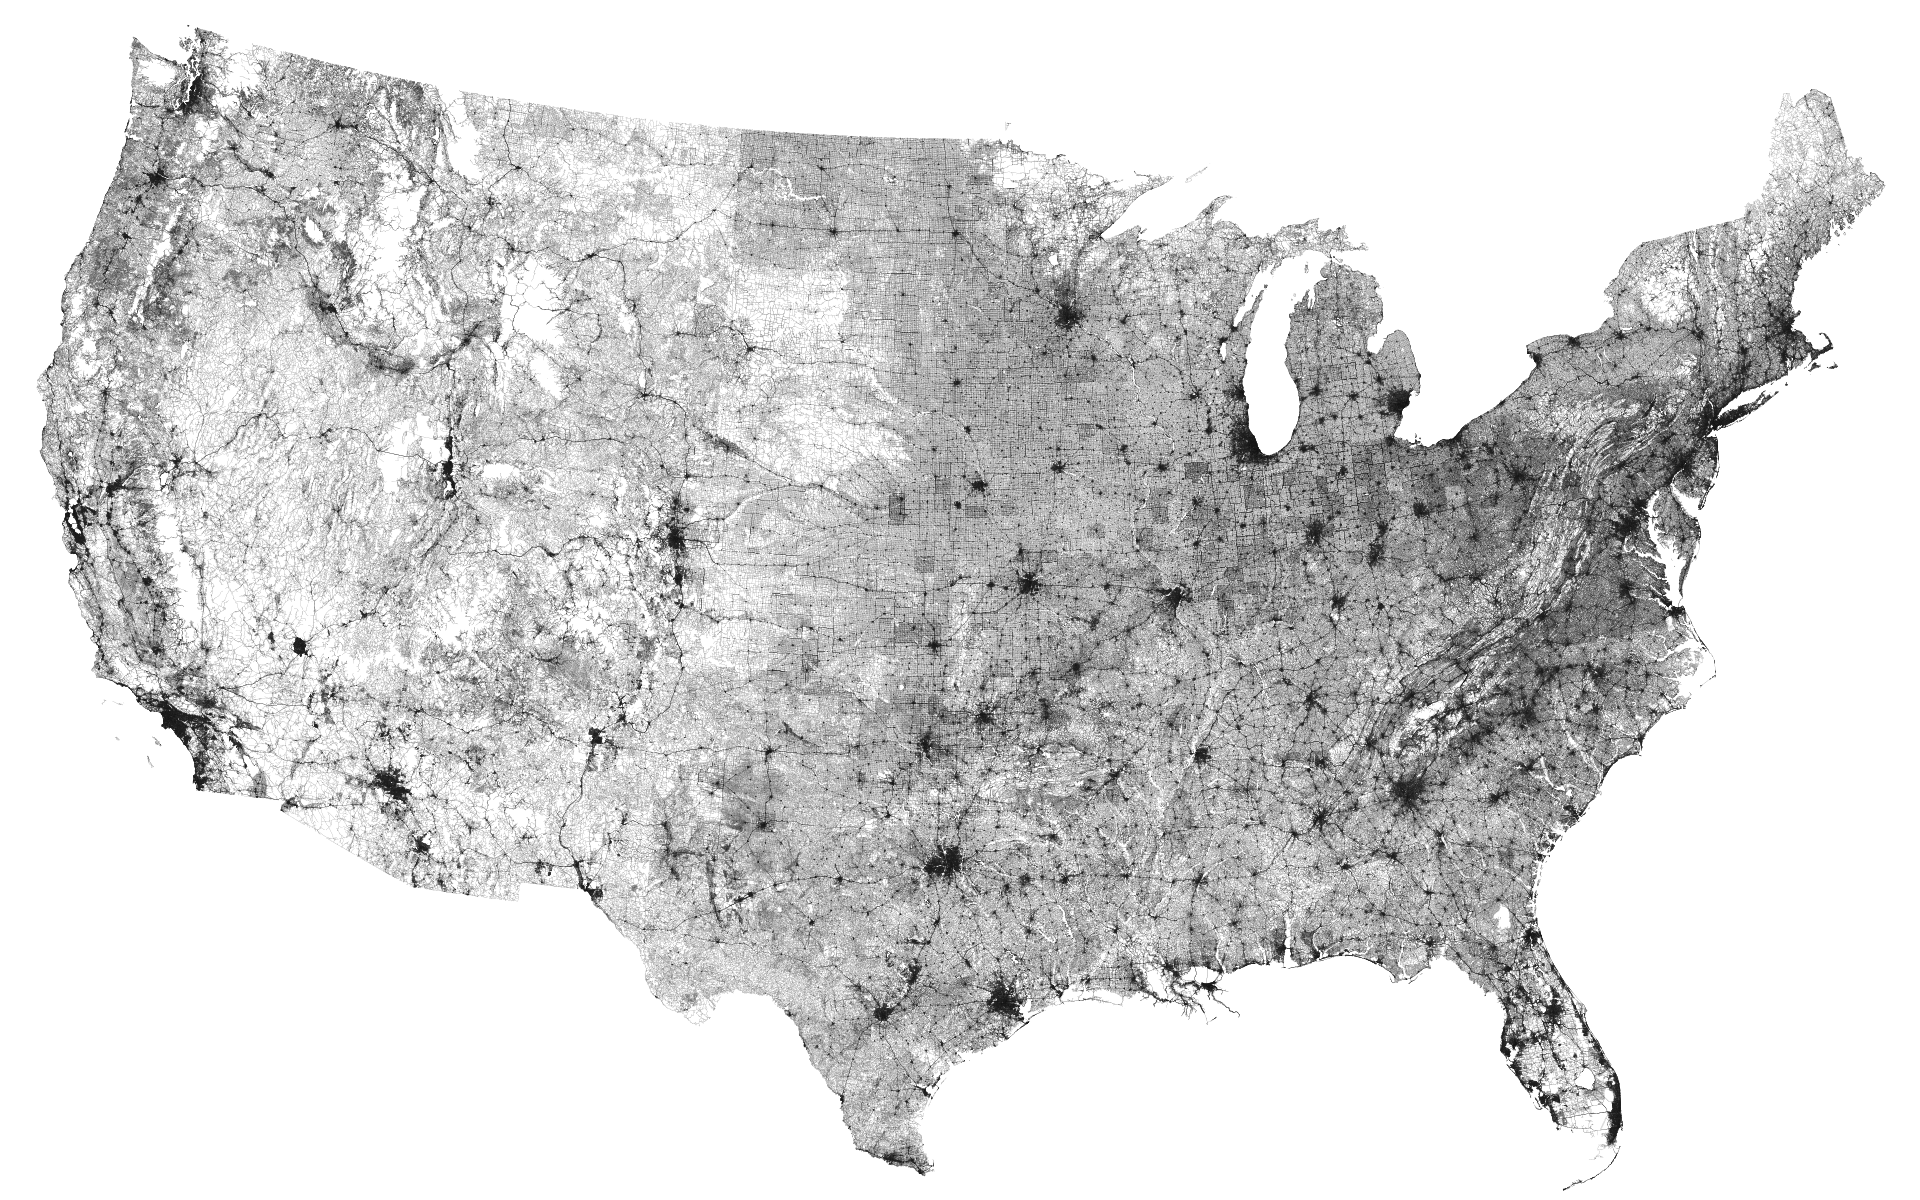 All the roads in the US